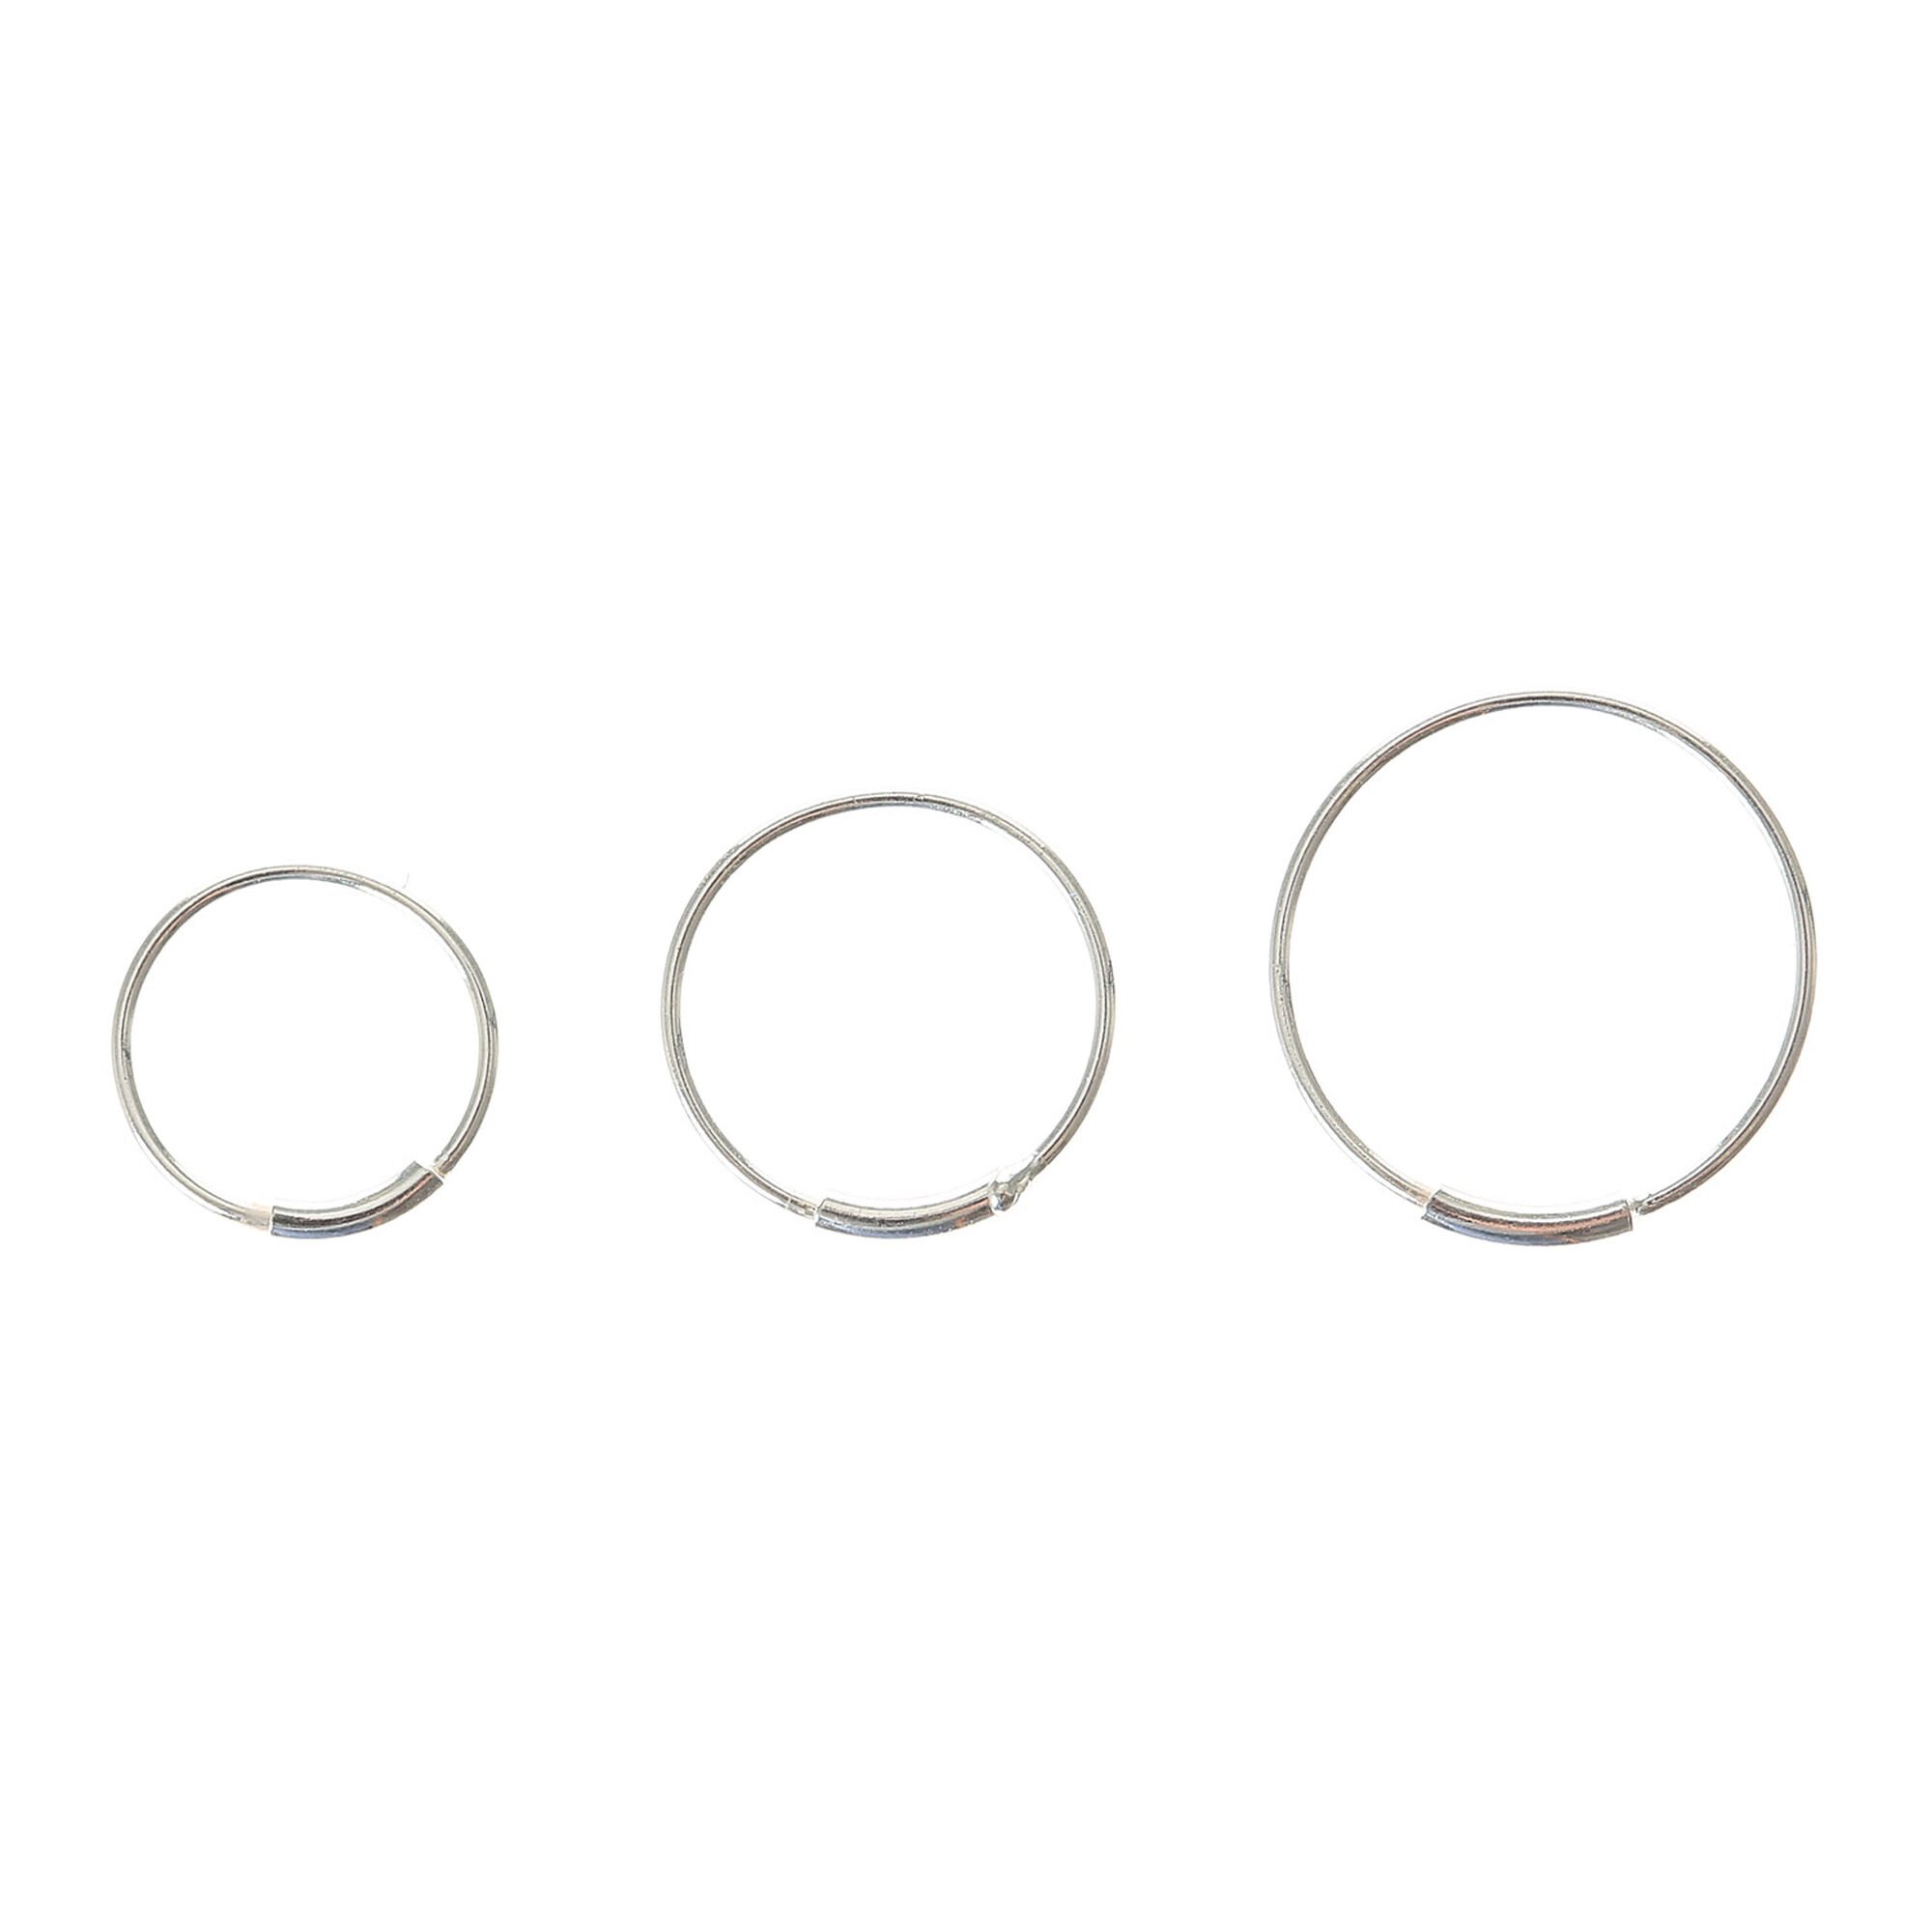 View Claires Graduated 22G Bar Hoop Nose Rings 3 Pack Silver information